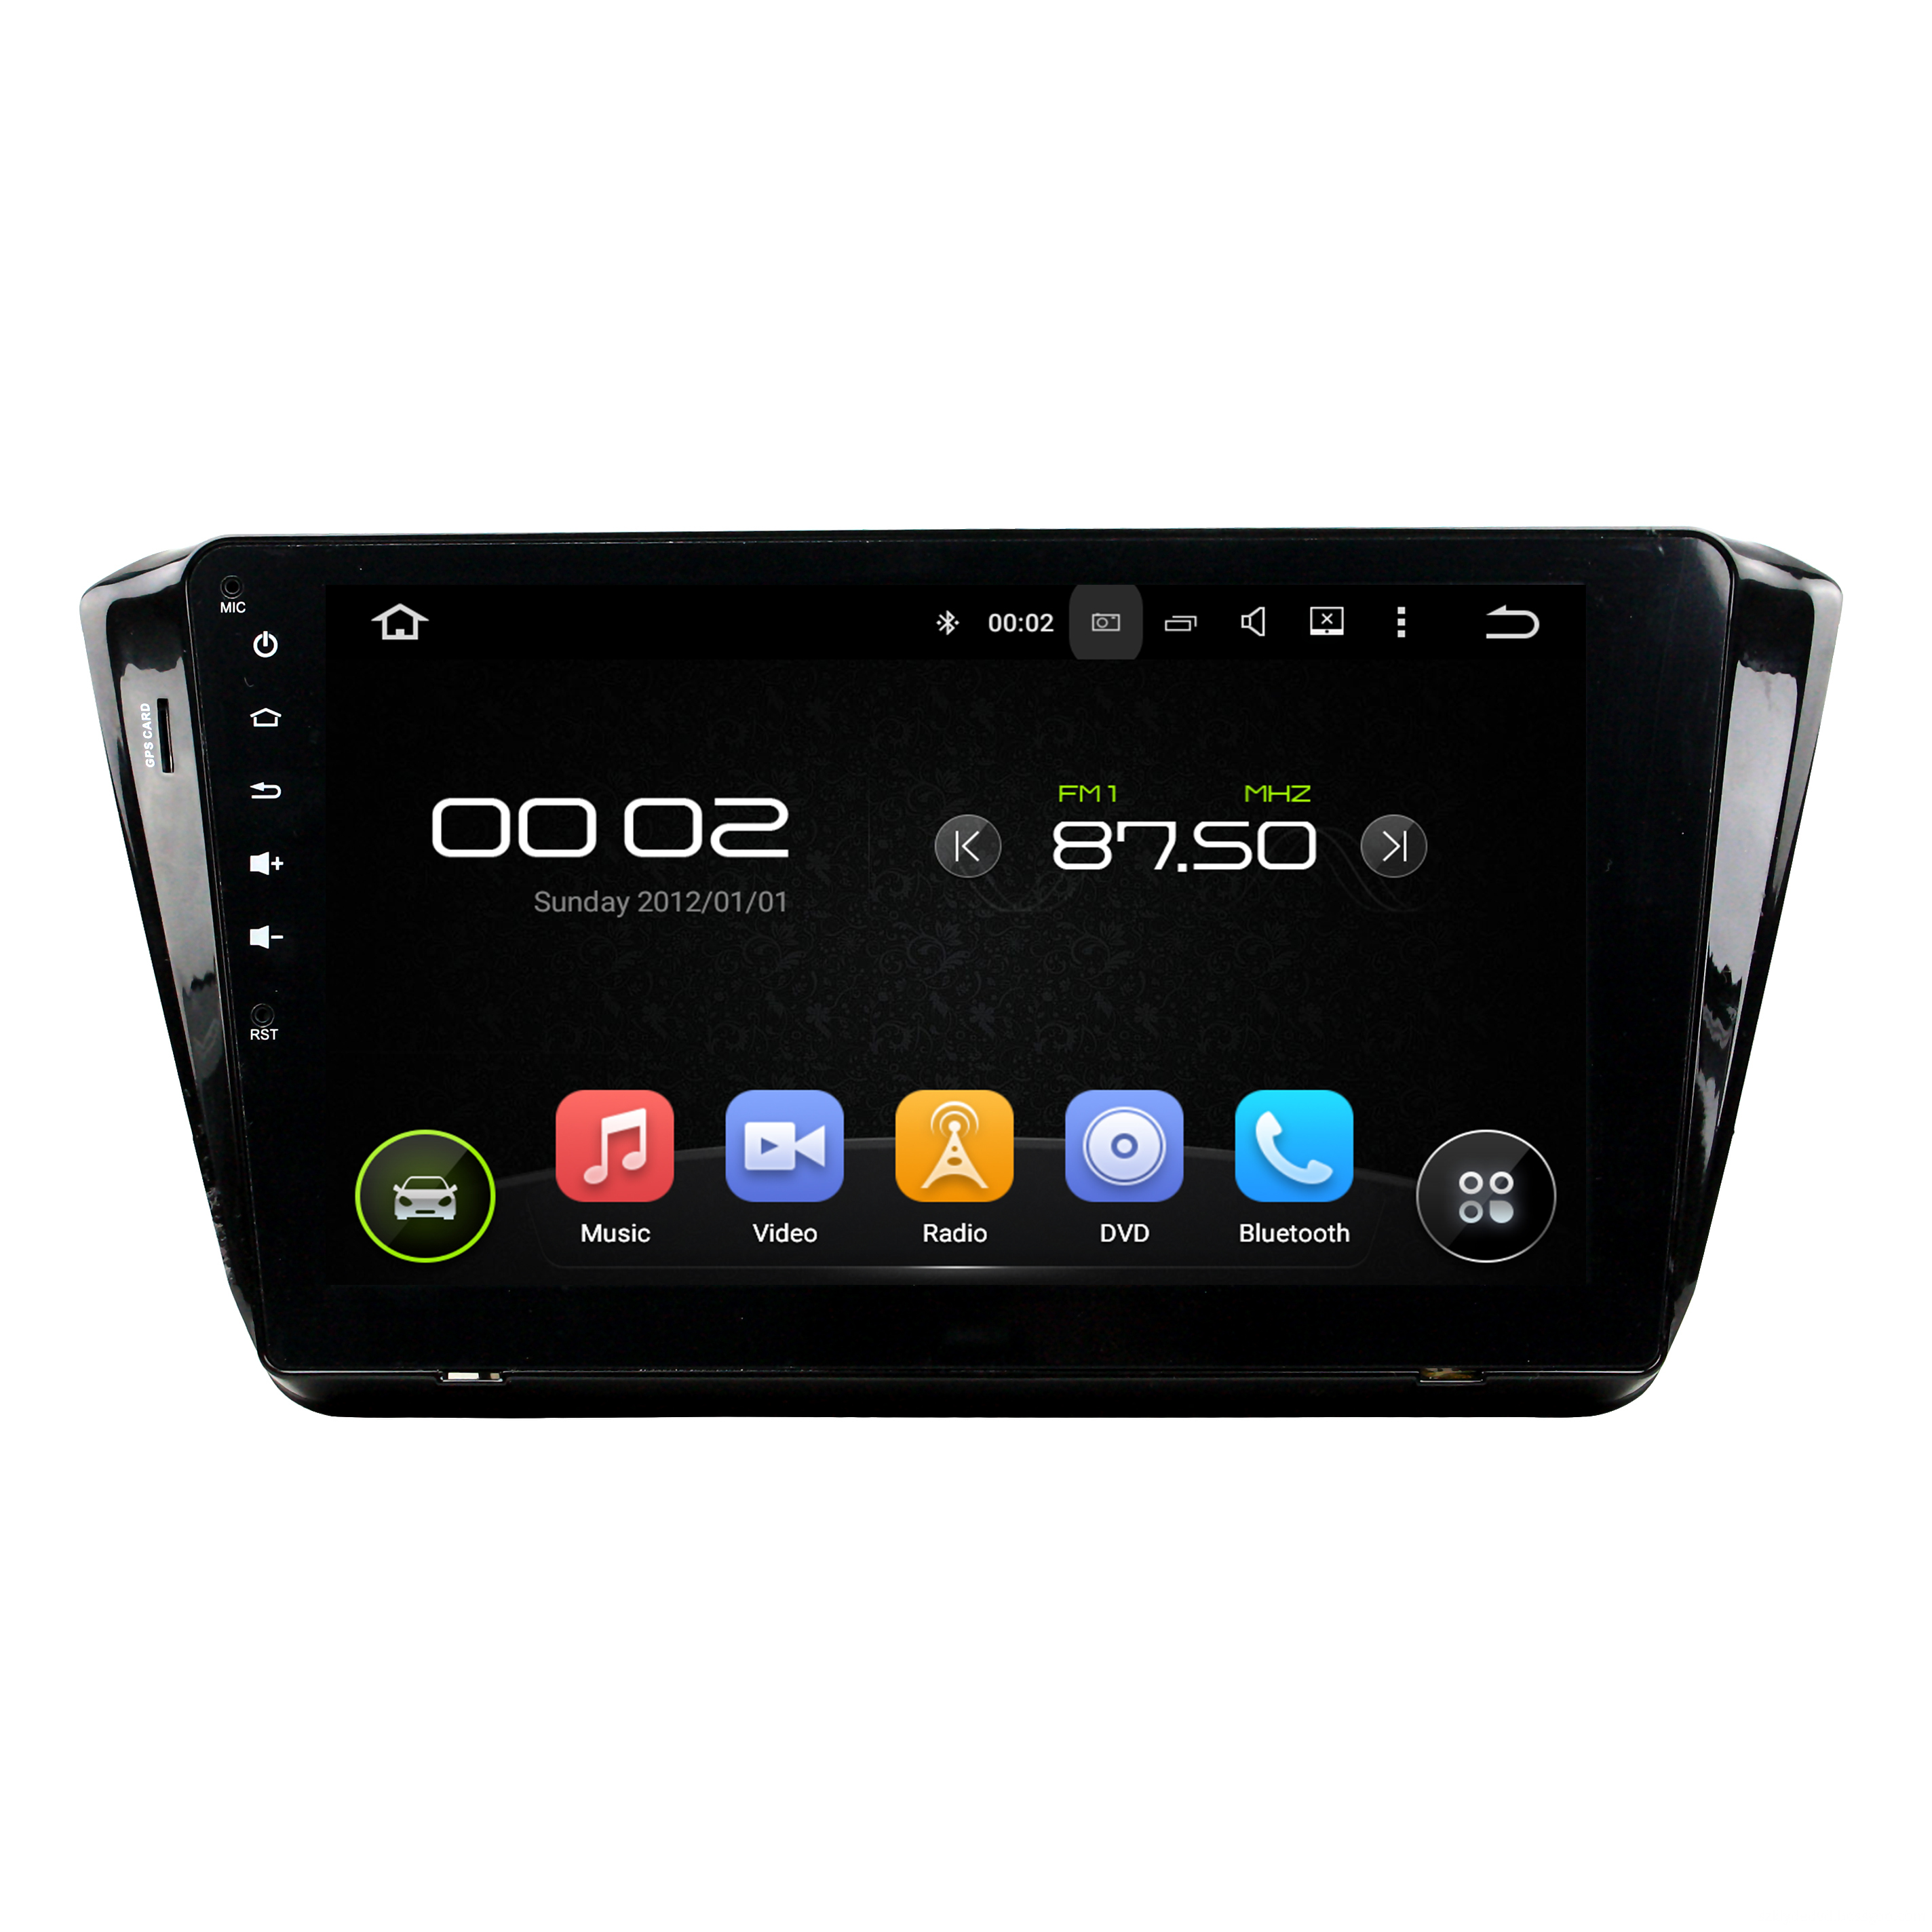 Superb Android Car DVD